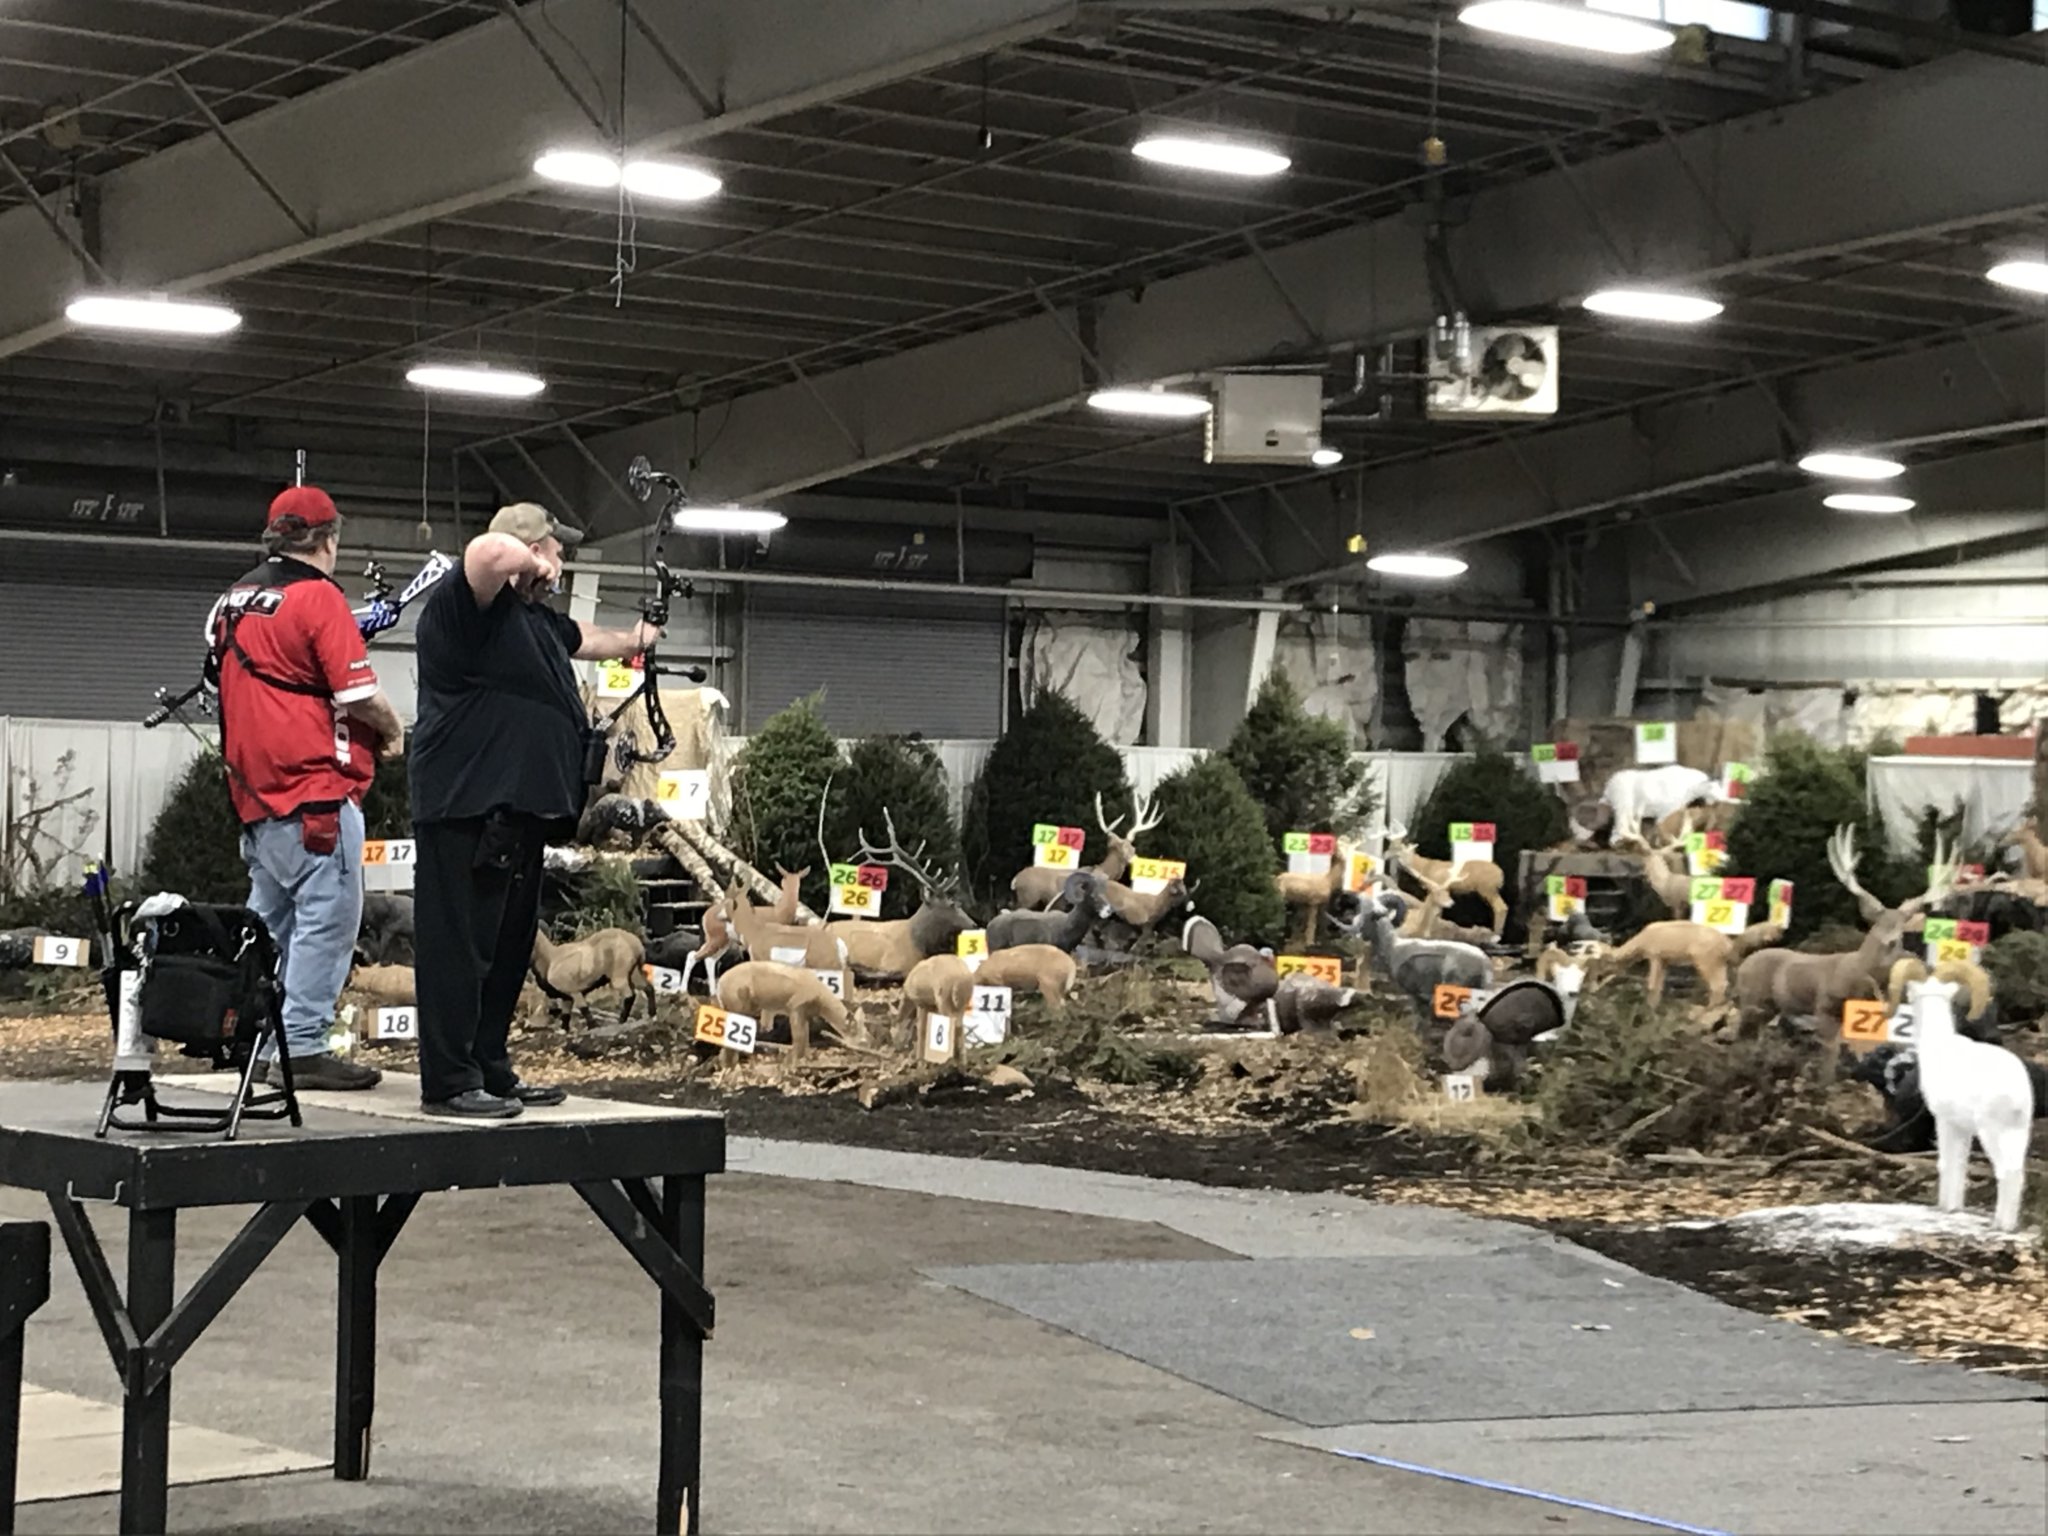 The Great American Outdoor Show at the PA Farm Show Complex in